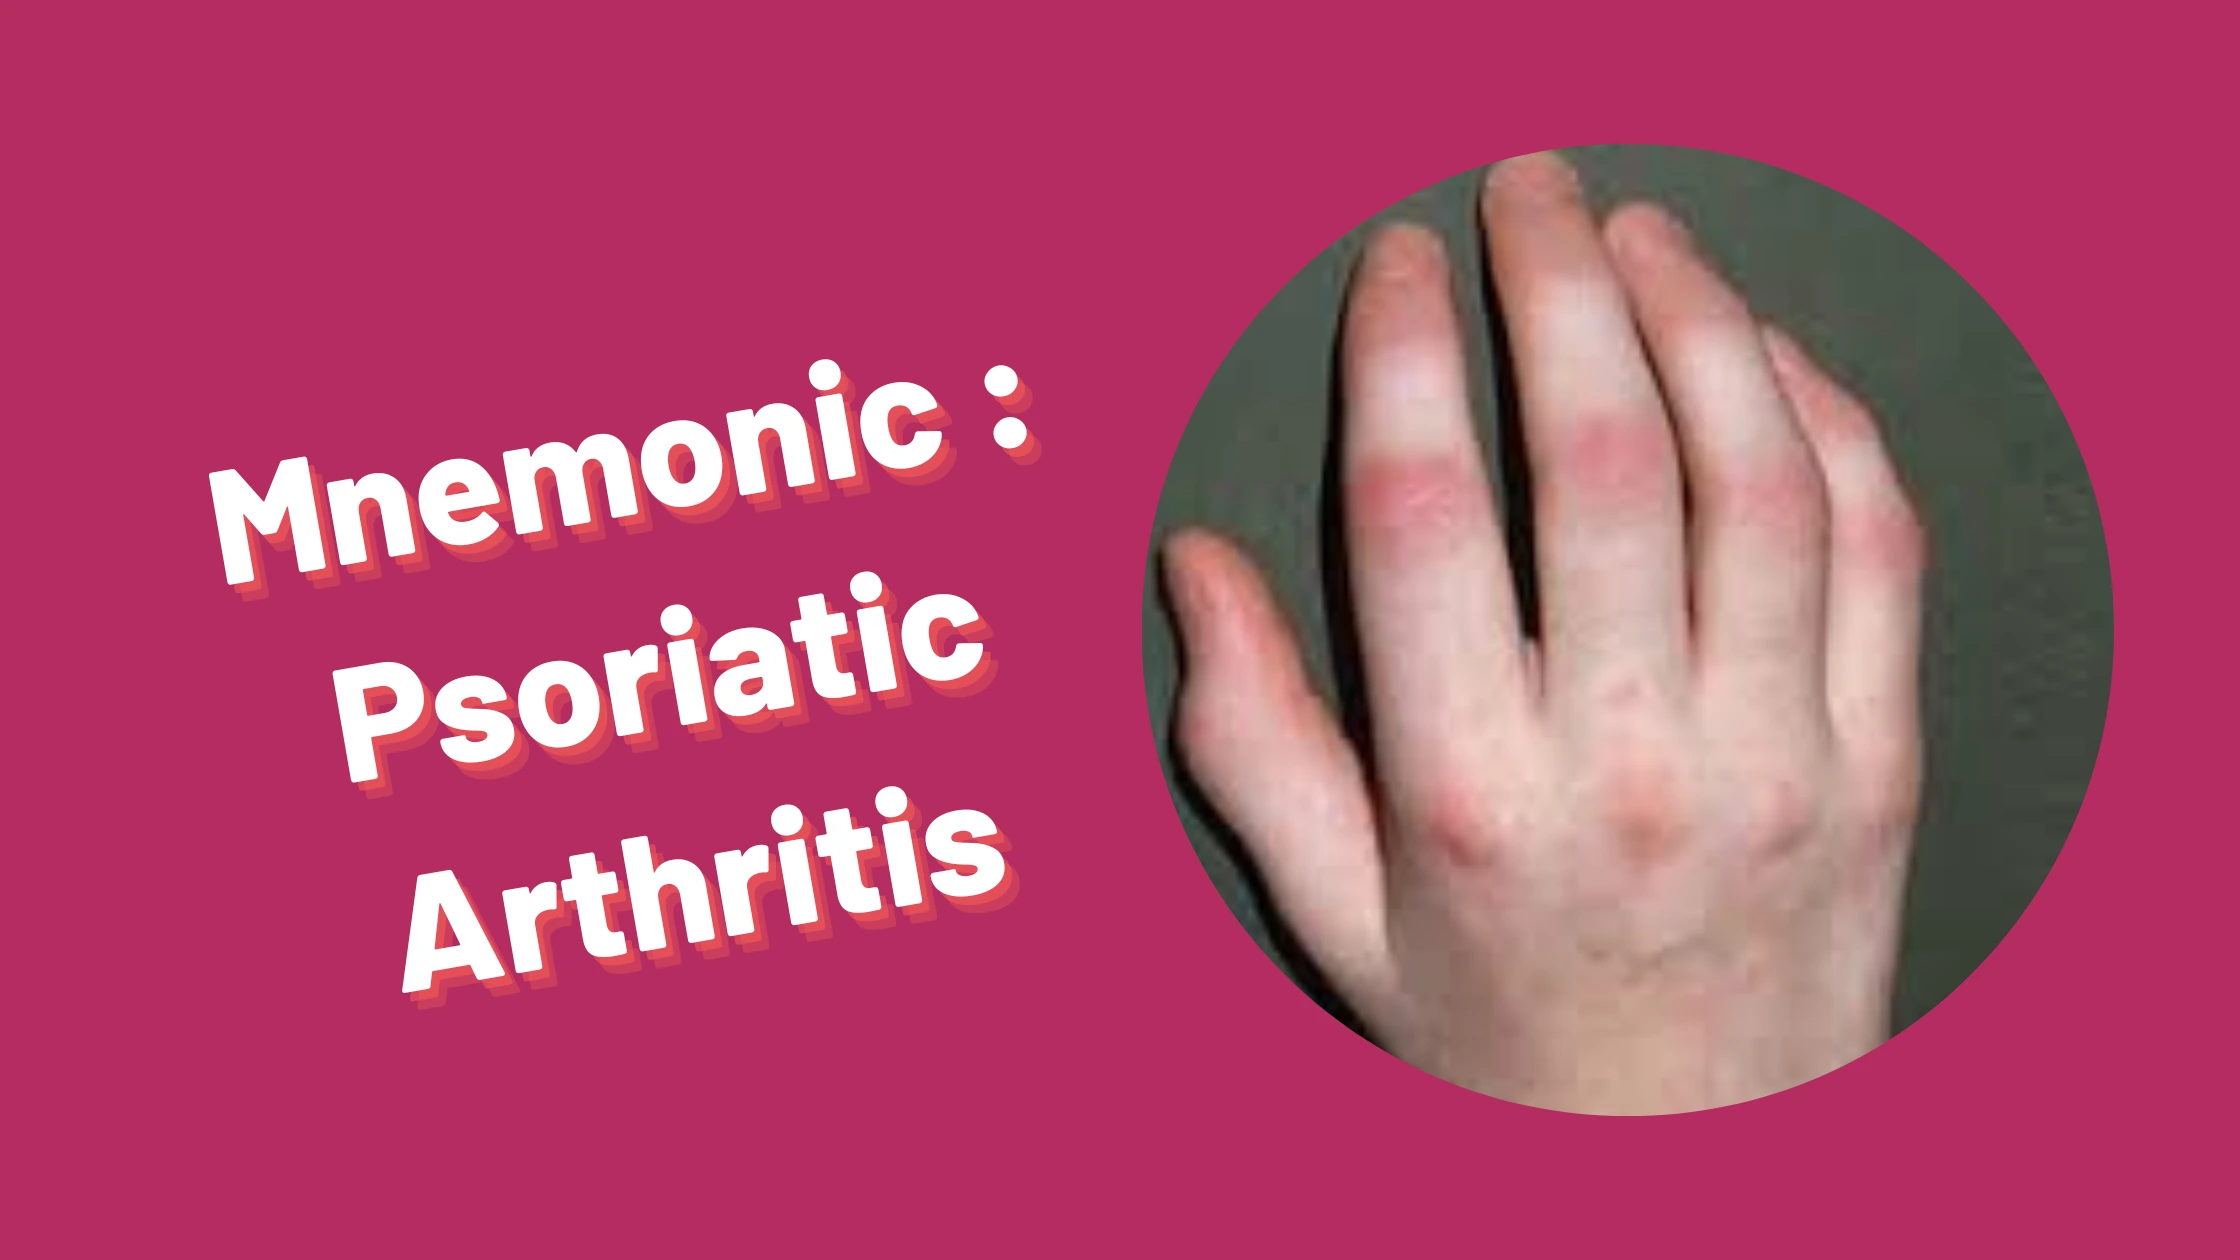 You are currently viewing [Very Cool] Mnemonic : Psoriatic arthritis